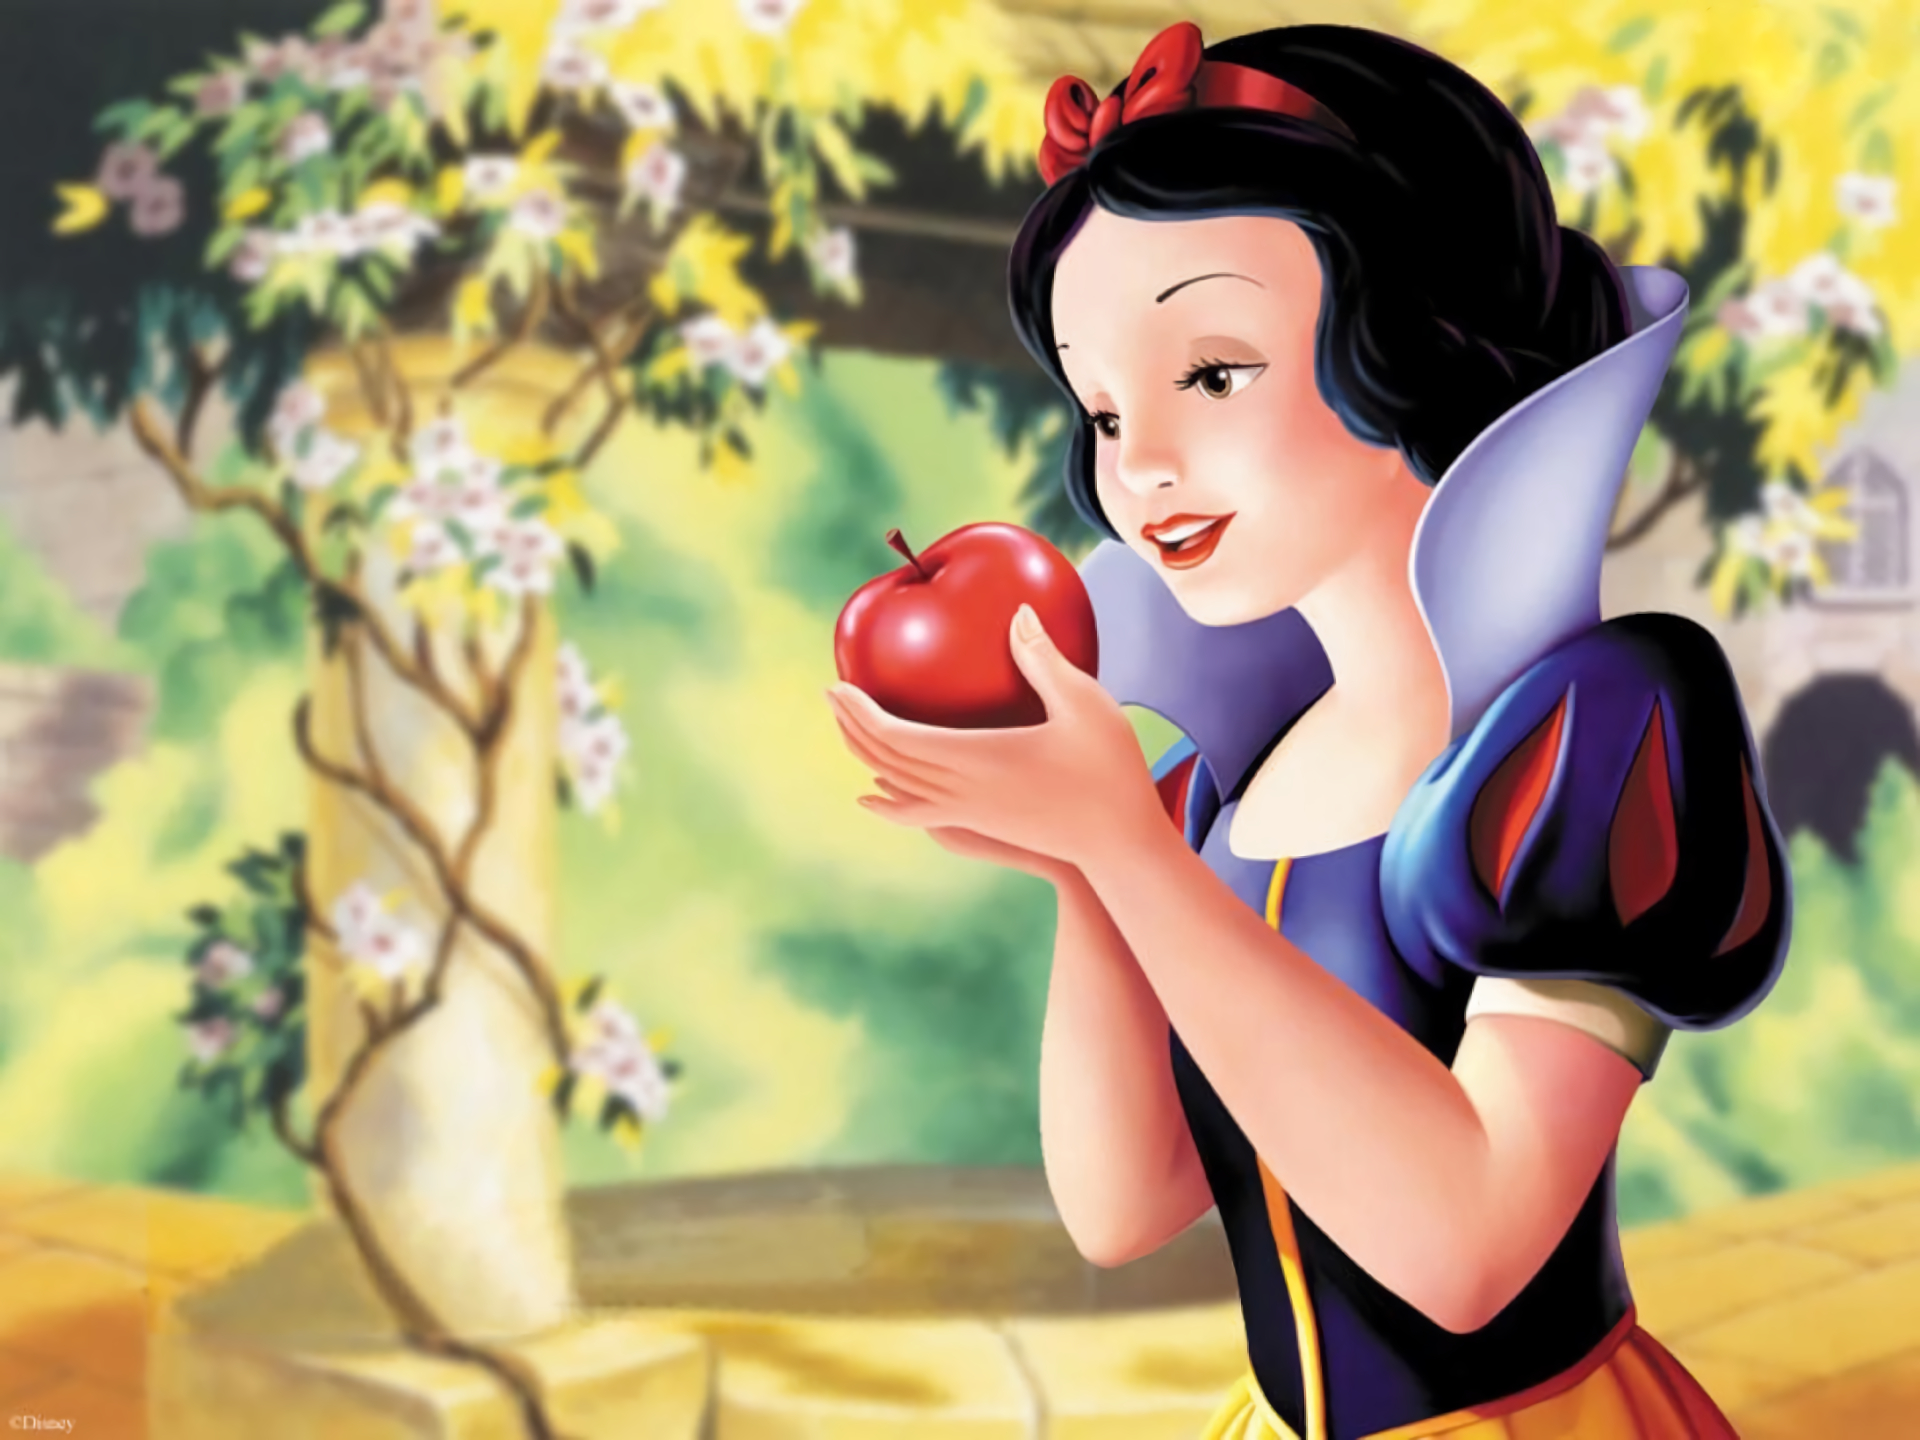 1920x1440 20+ Snow White and the Seven Dwarfs HD Wallpapers and Backgrounds